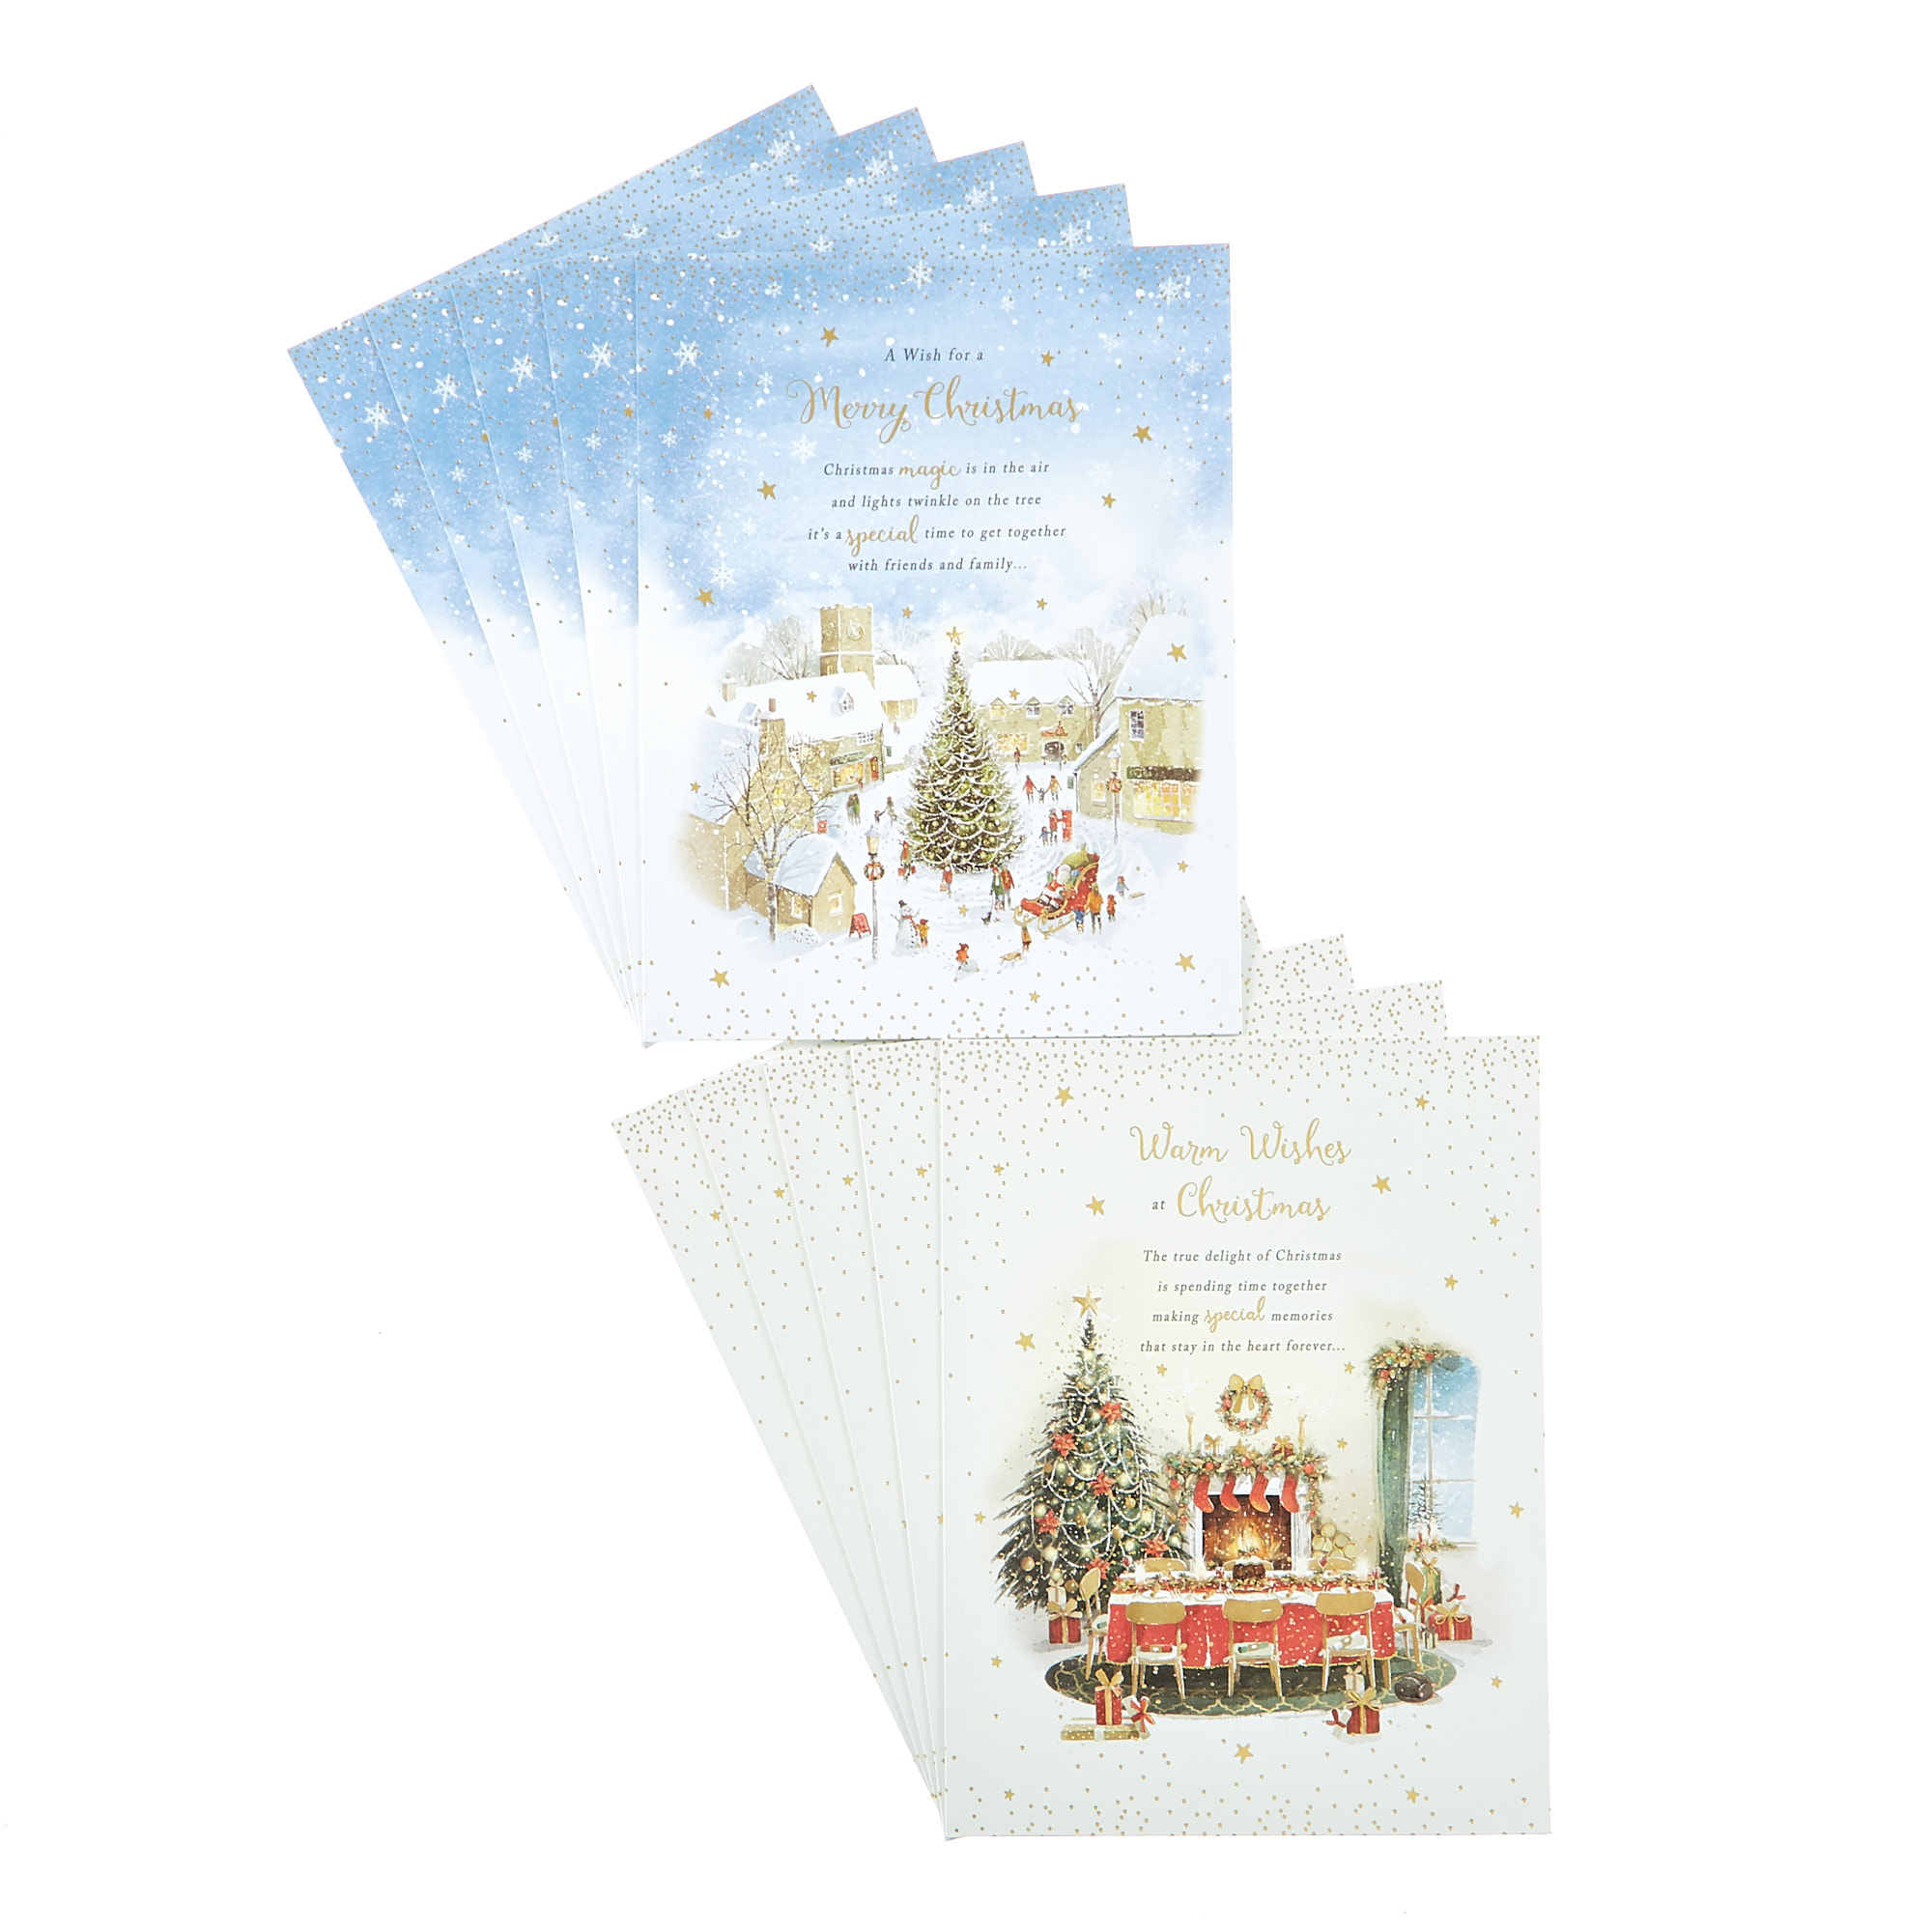 12 Deluxe Charity Boxed Christmas Cards - Festive Scenes (2 Designs)